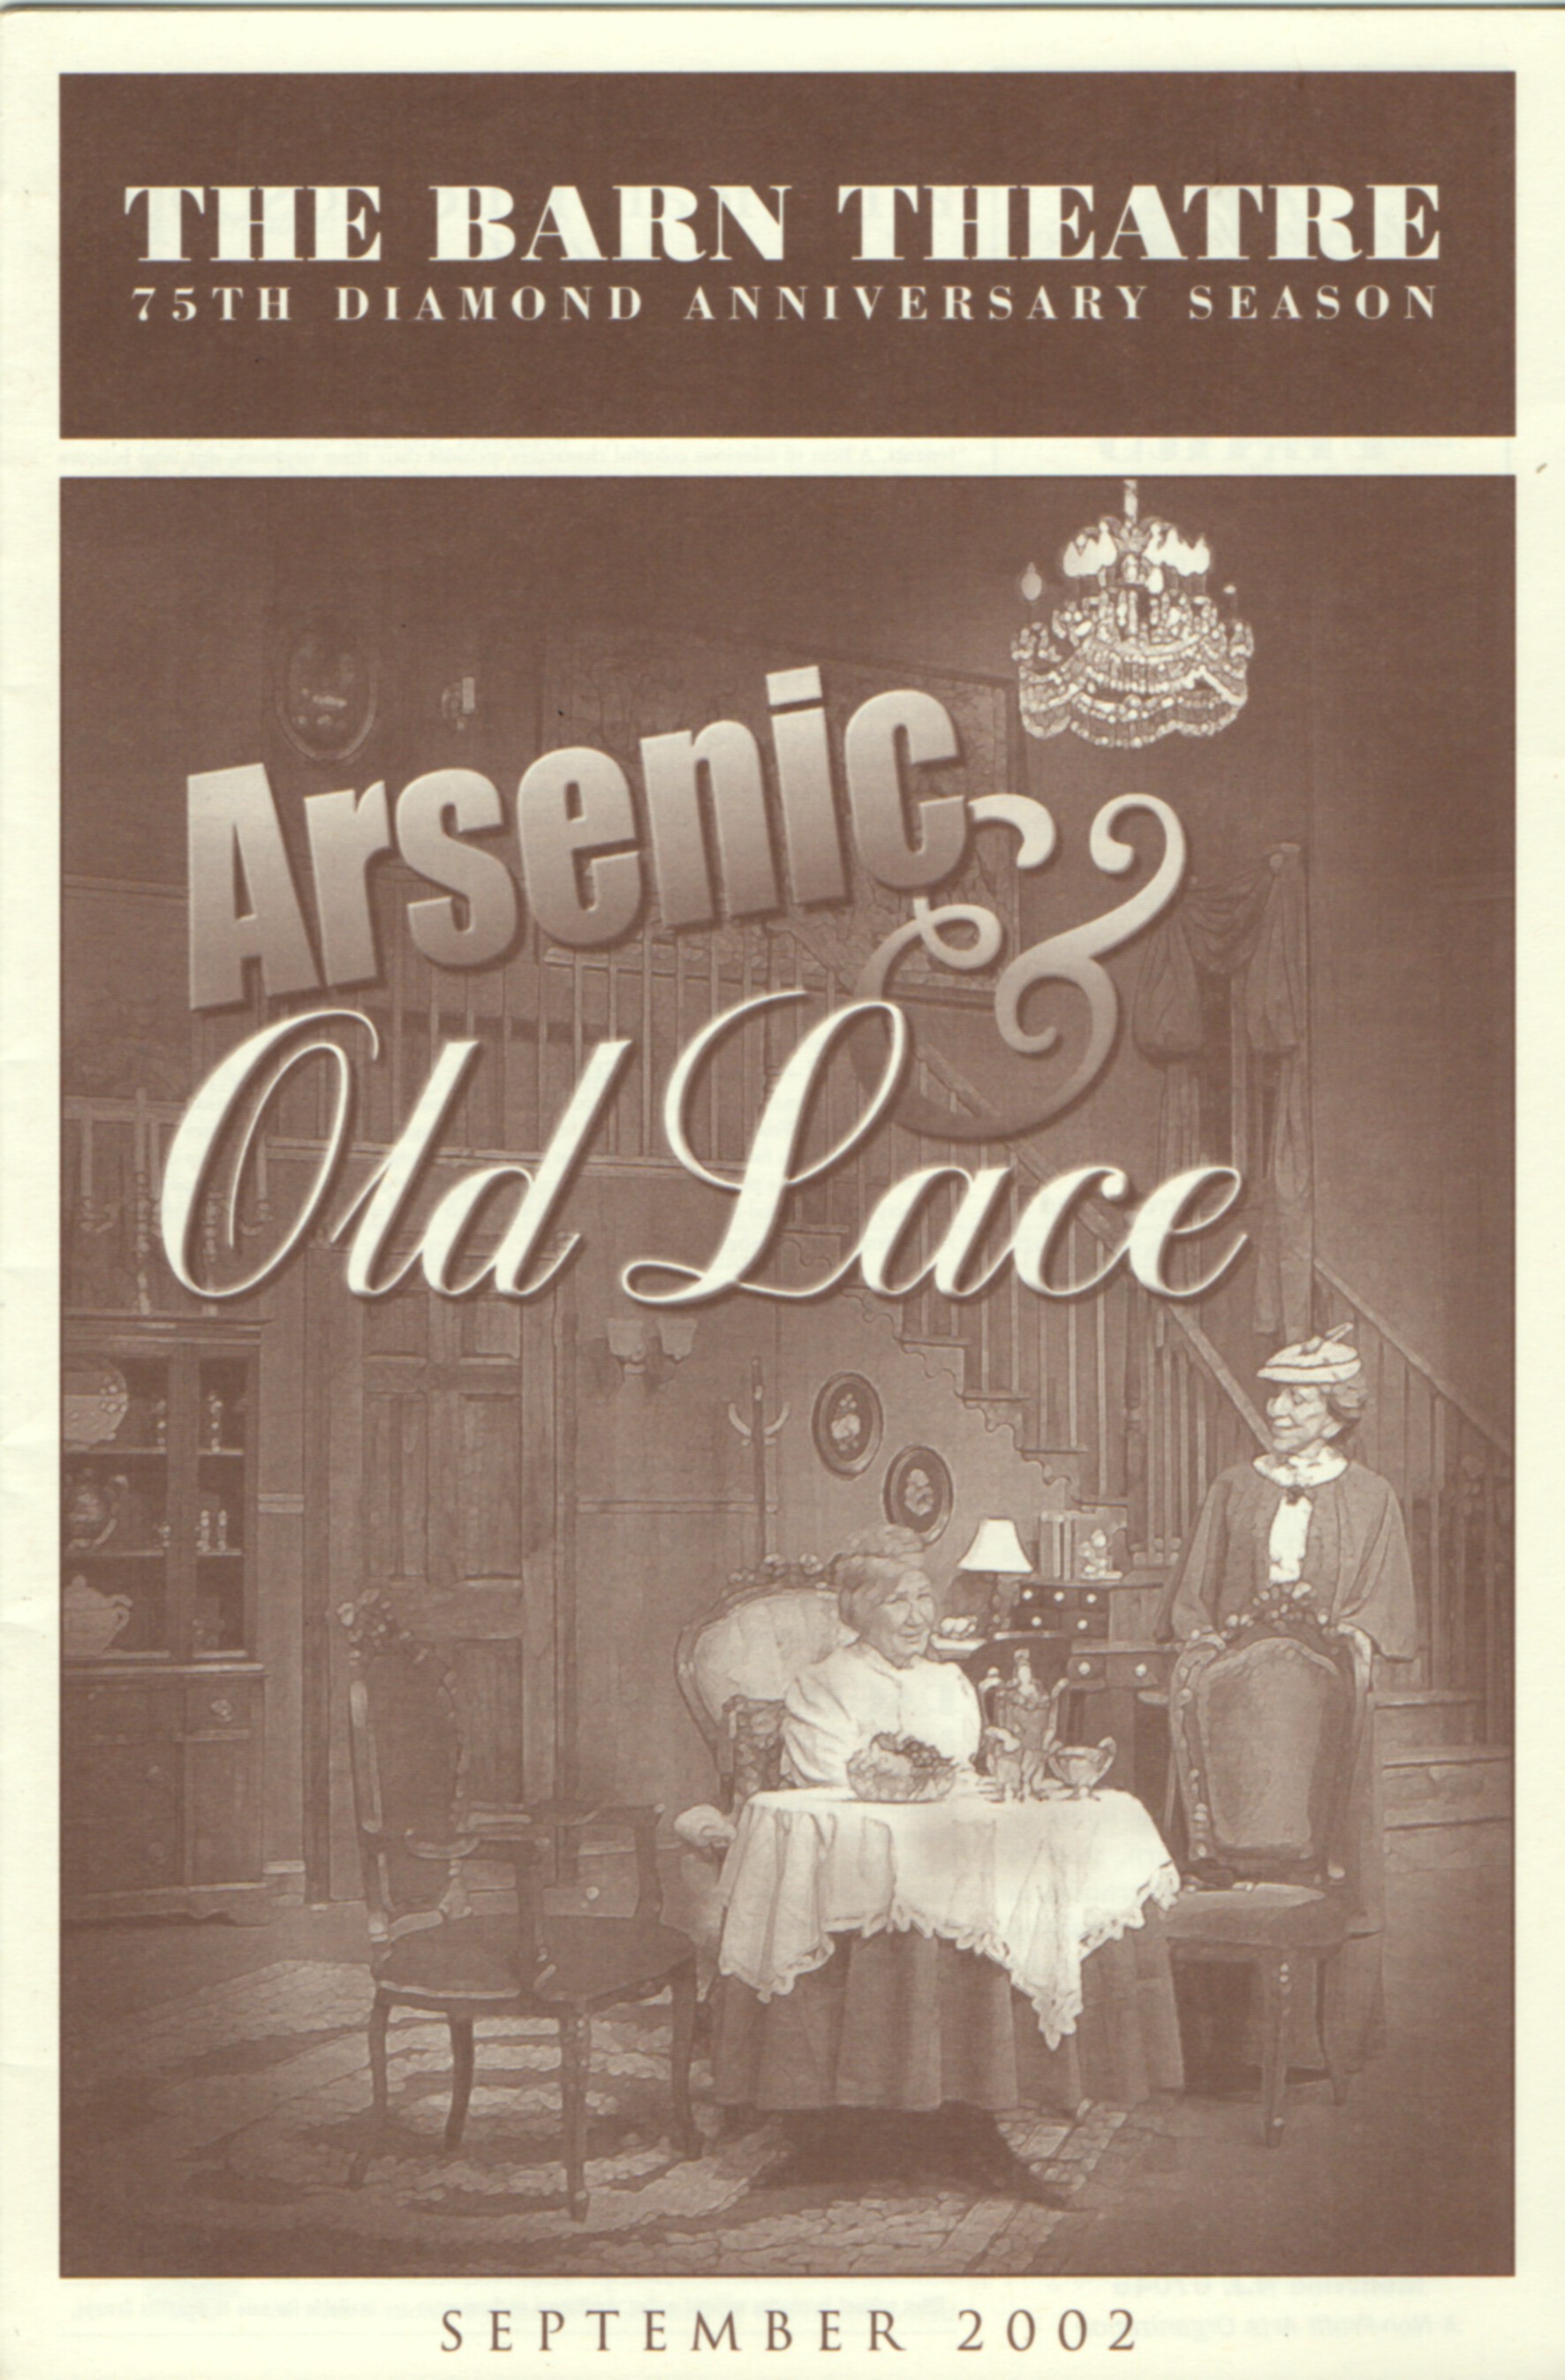 Program Cover for Arsenic and Old Lace